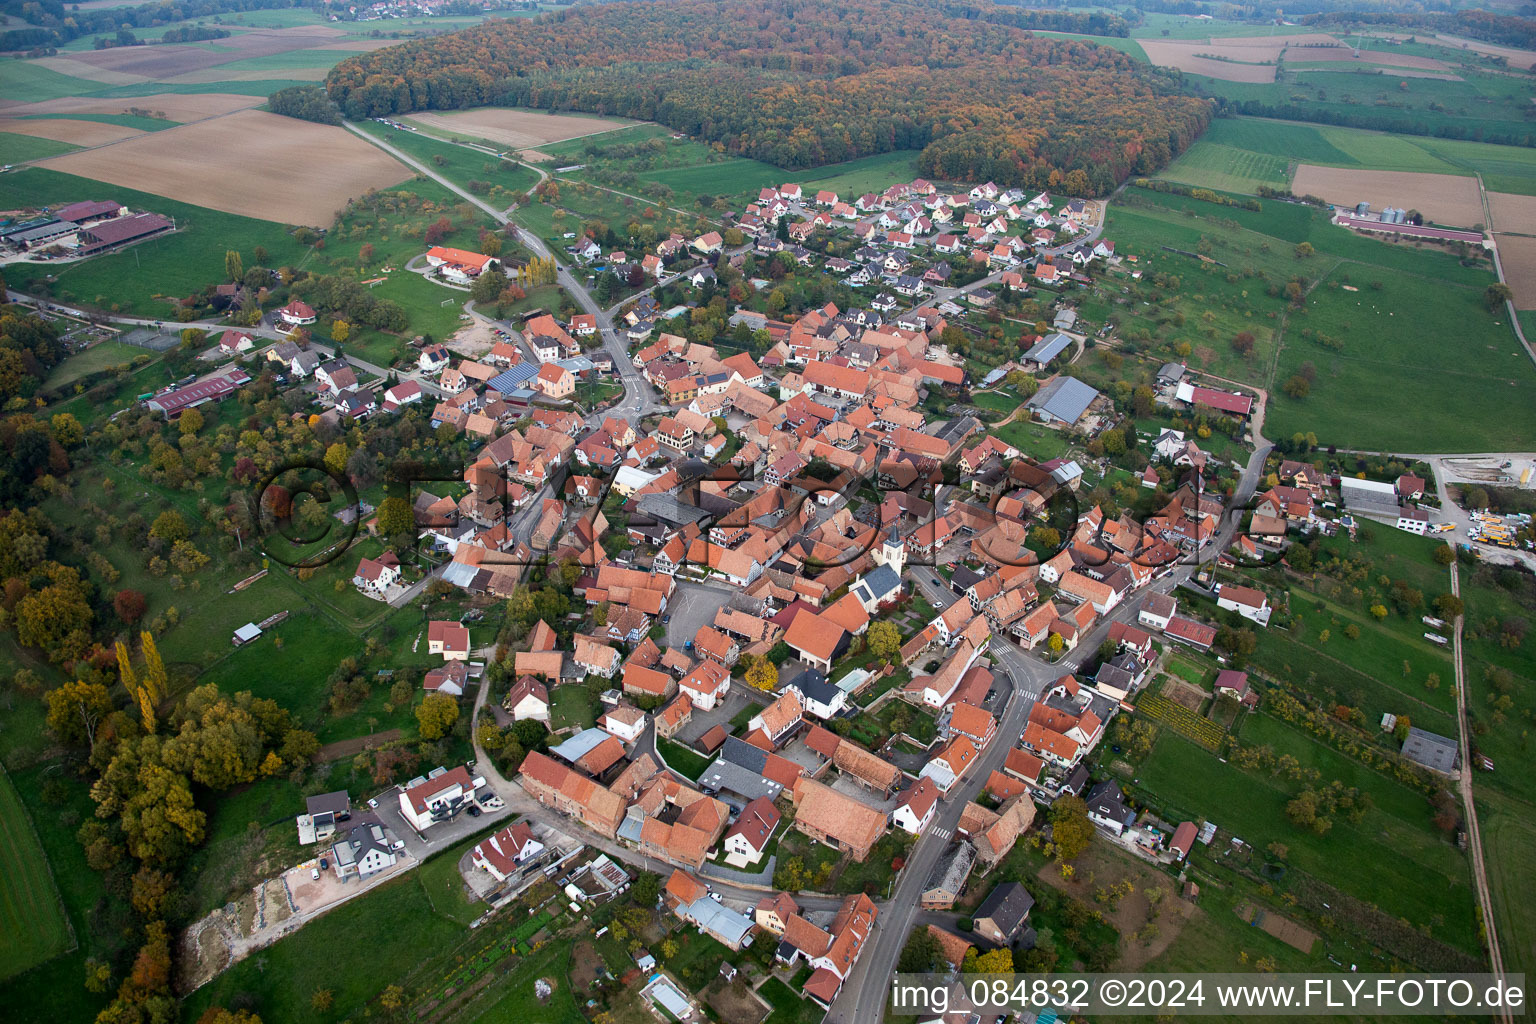 Aerial view of Village - view on the edge of agricultural fields and farmland in Engwiller in Grand Est, France